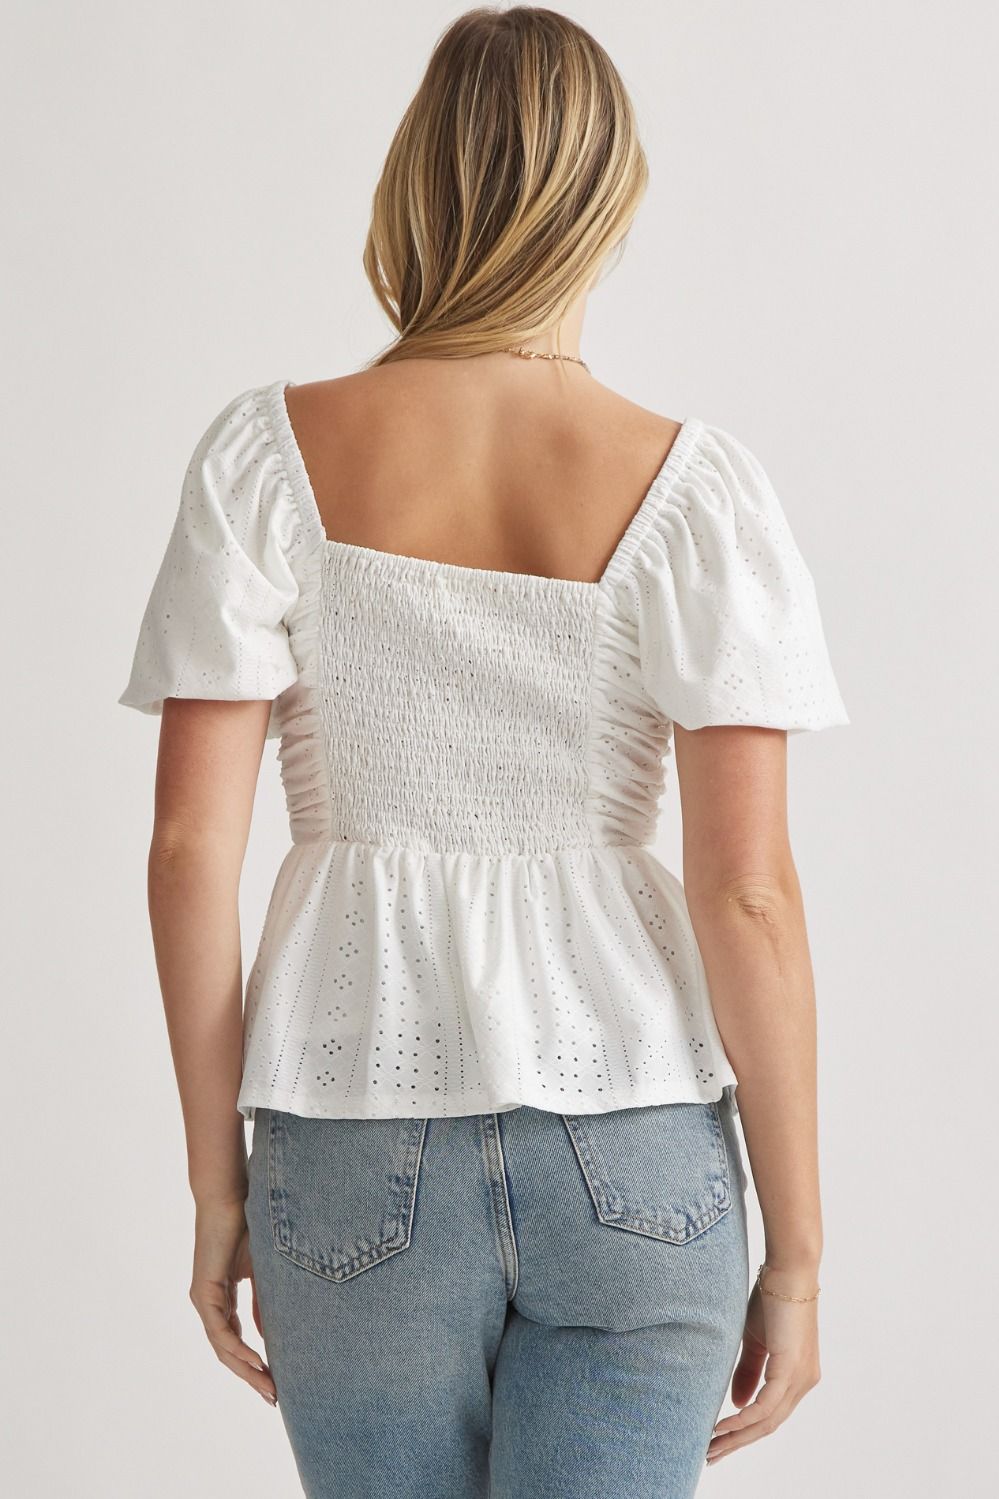 Elevate your wardrobe with our Springtime Sip Top! This eyelet sweetheart neckline top features delicate puff sleeves and ruching at the front, giving it a romantic and elegant look. The smocked back and lining provide a comfortable, flattering fit. Made with high-quality woven fabric, this top is non-sheer and perfect for any occasion. Transform your outfit with this must-have piece!